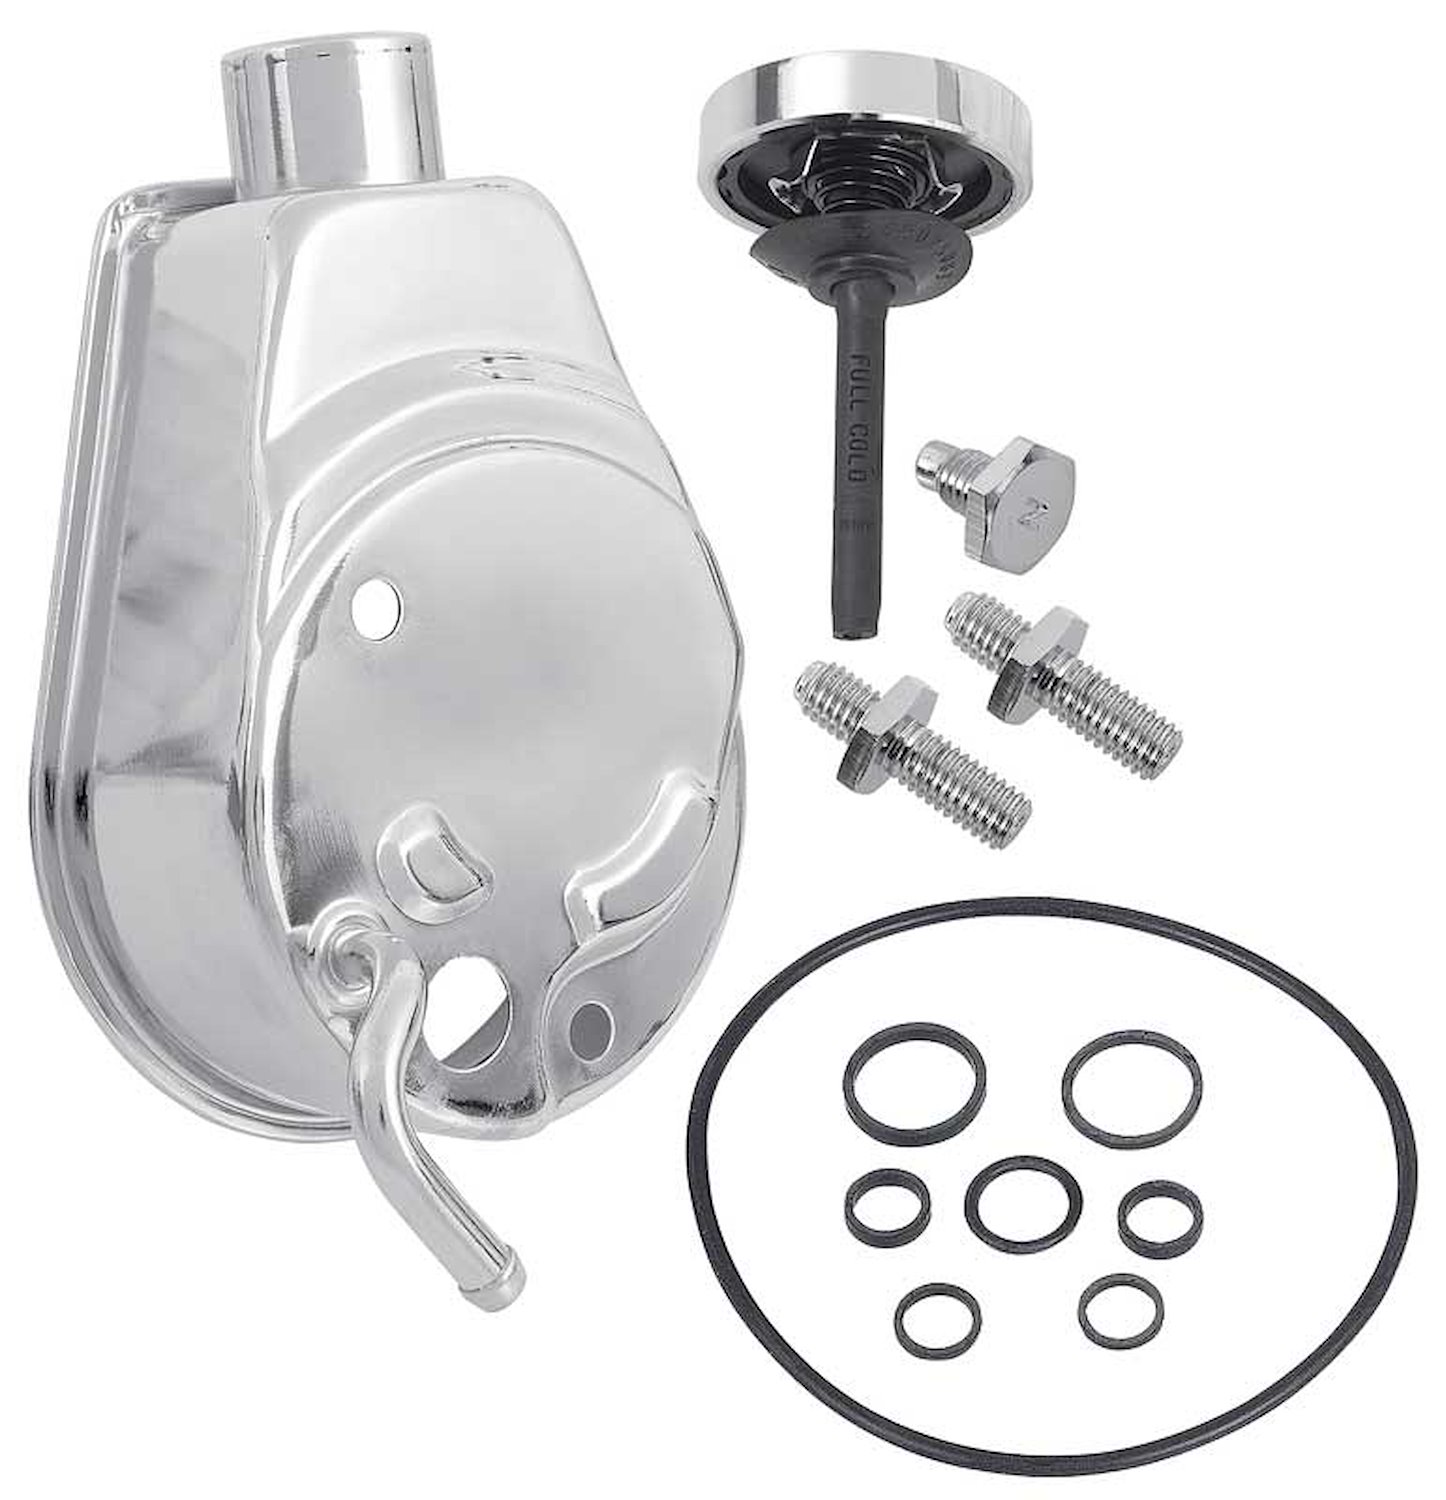 1253579 Chrome Power Steering Reservoir-1970-75 Chevrolet; with Cap; Hardware; 6 & 8 Cylinder